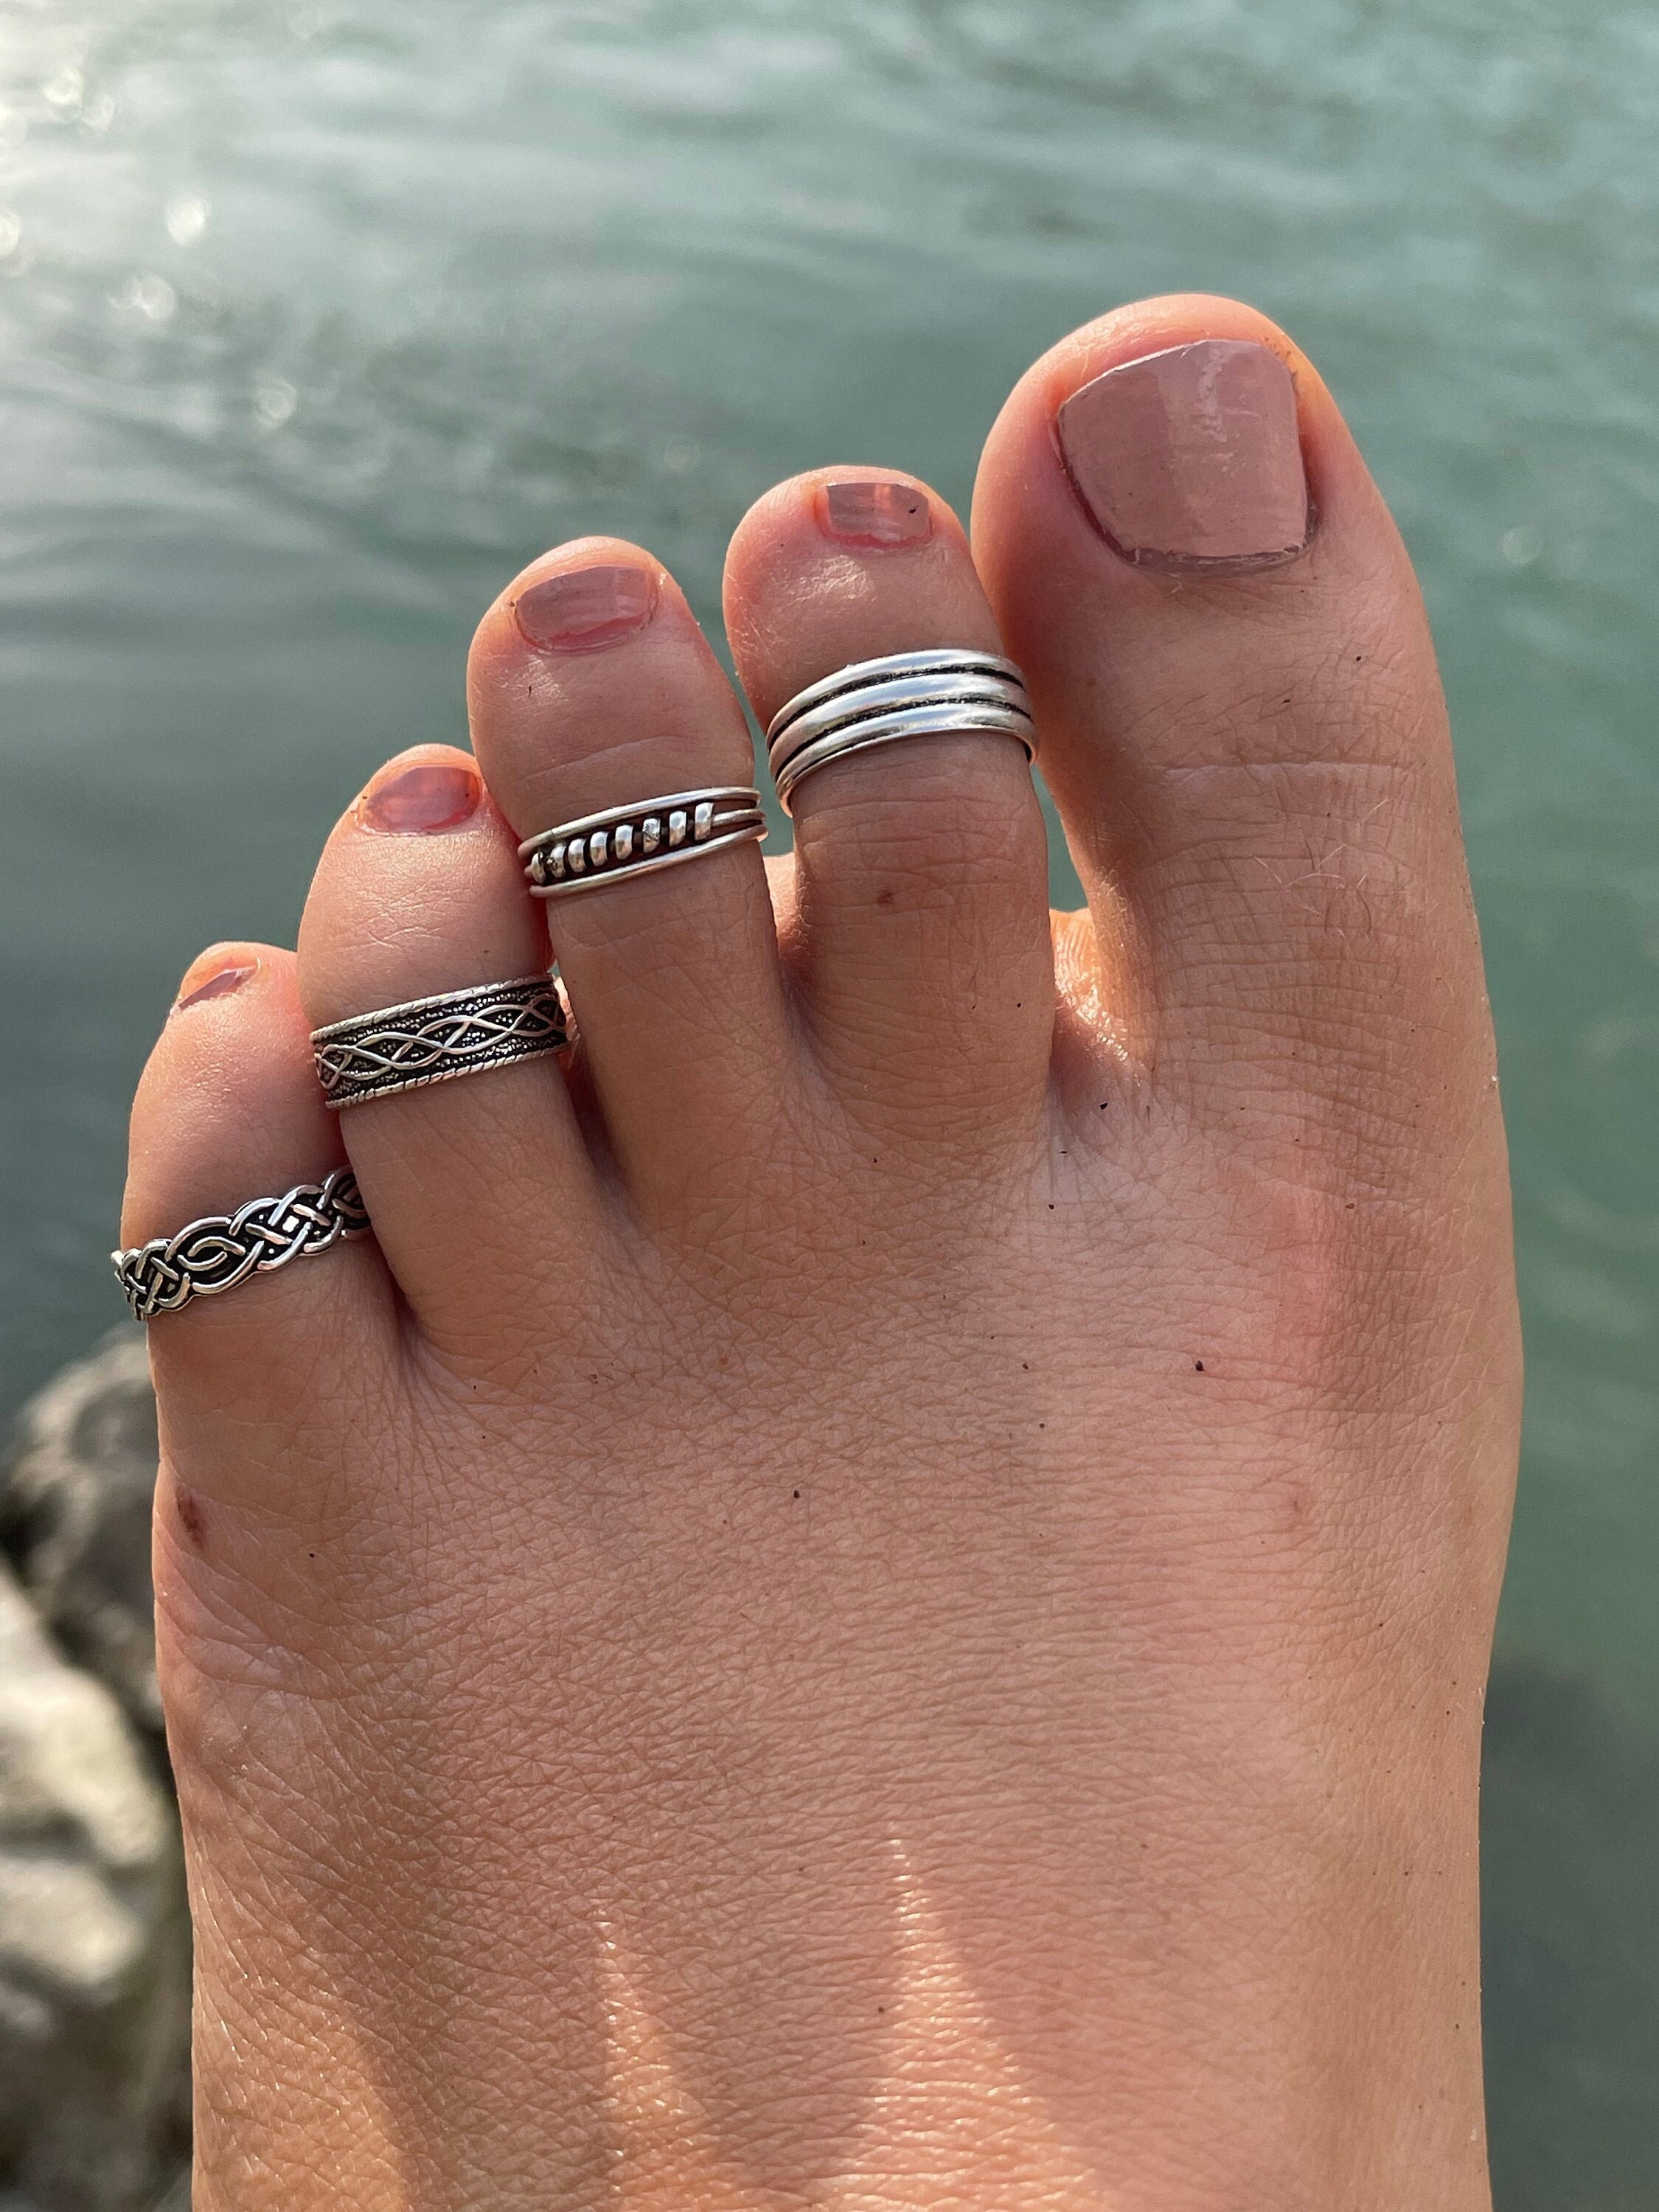 5mm Toe Ring Band 925 Sterling Silver Toe Ring Thin Adjustable Toe Ring |  eBay